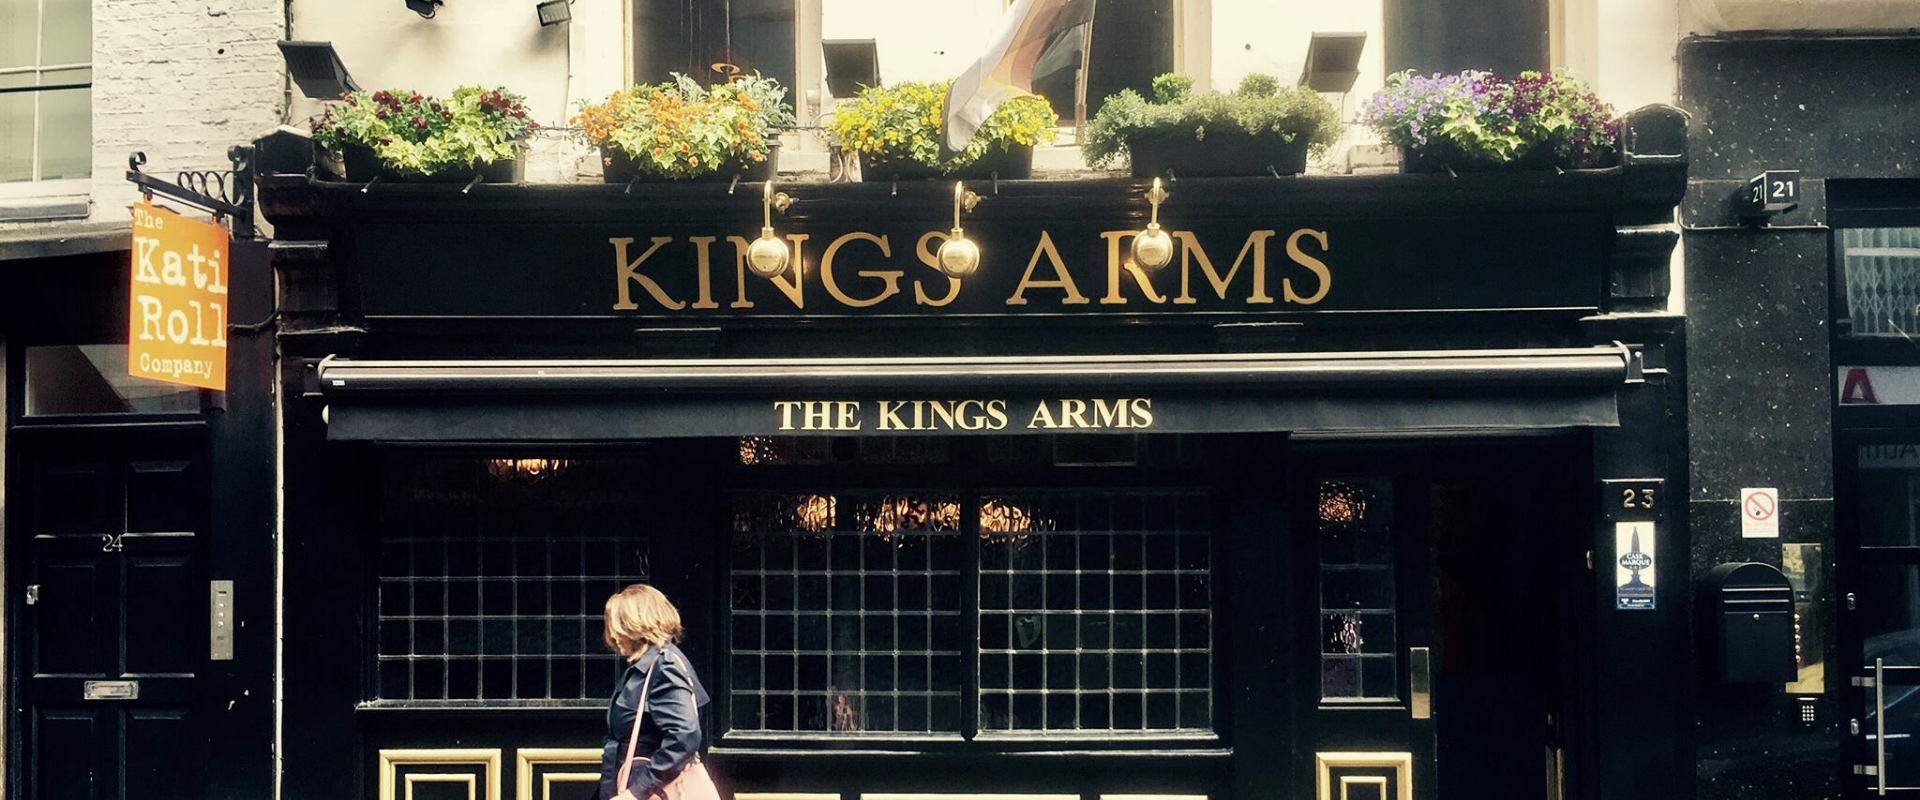 Kings Arms Exterior